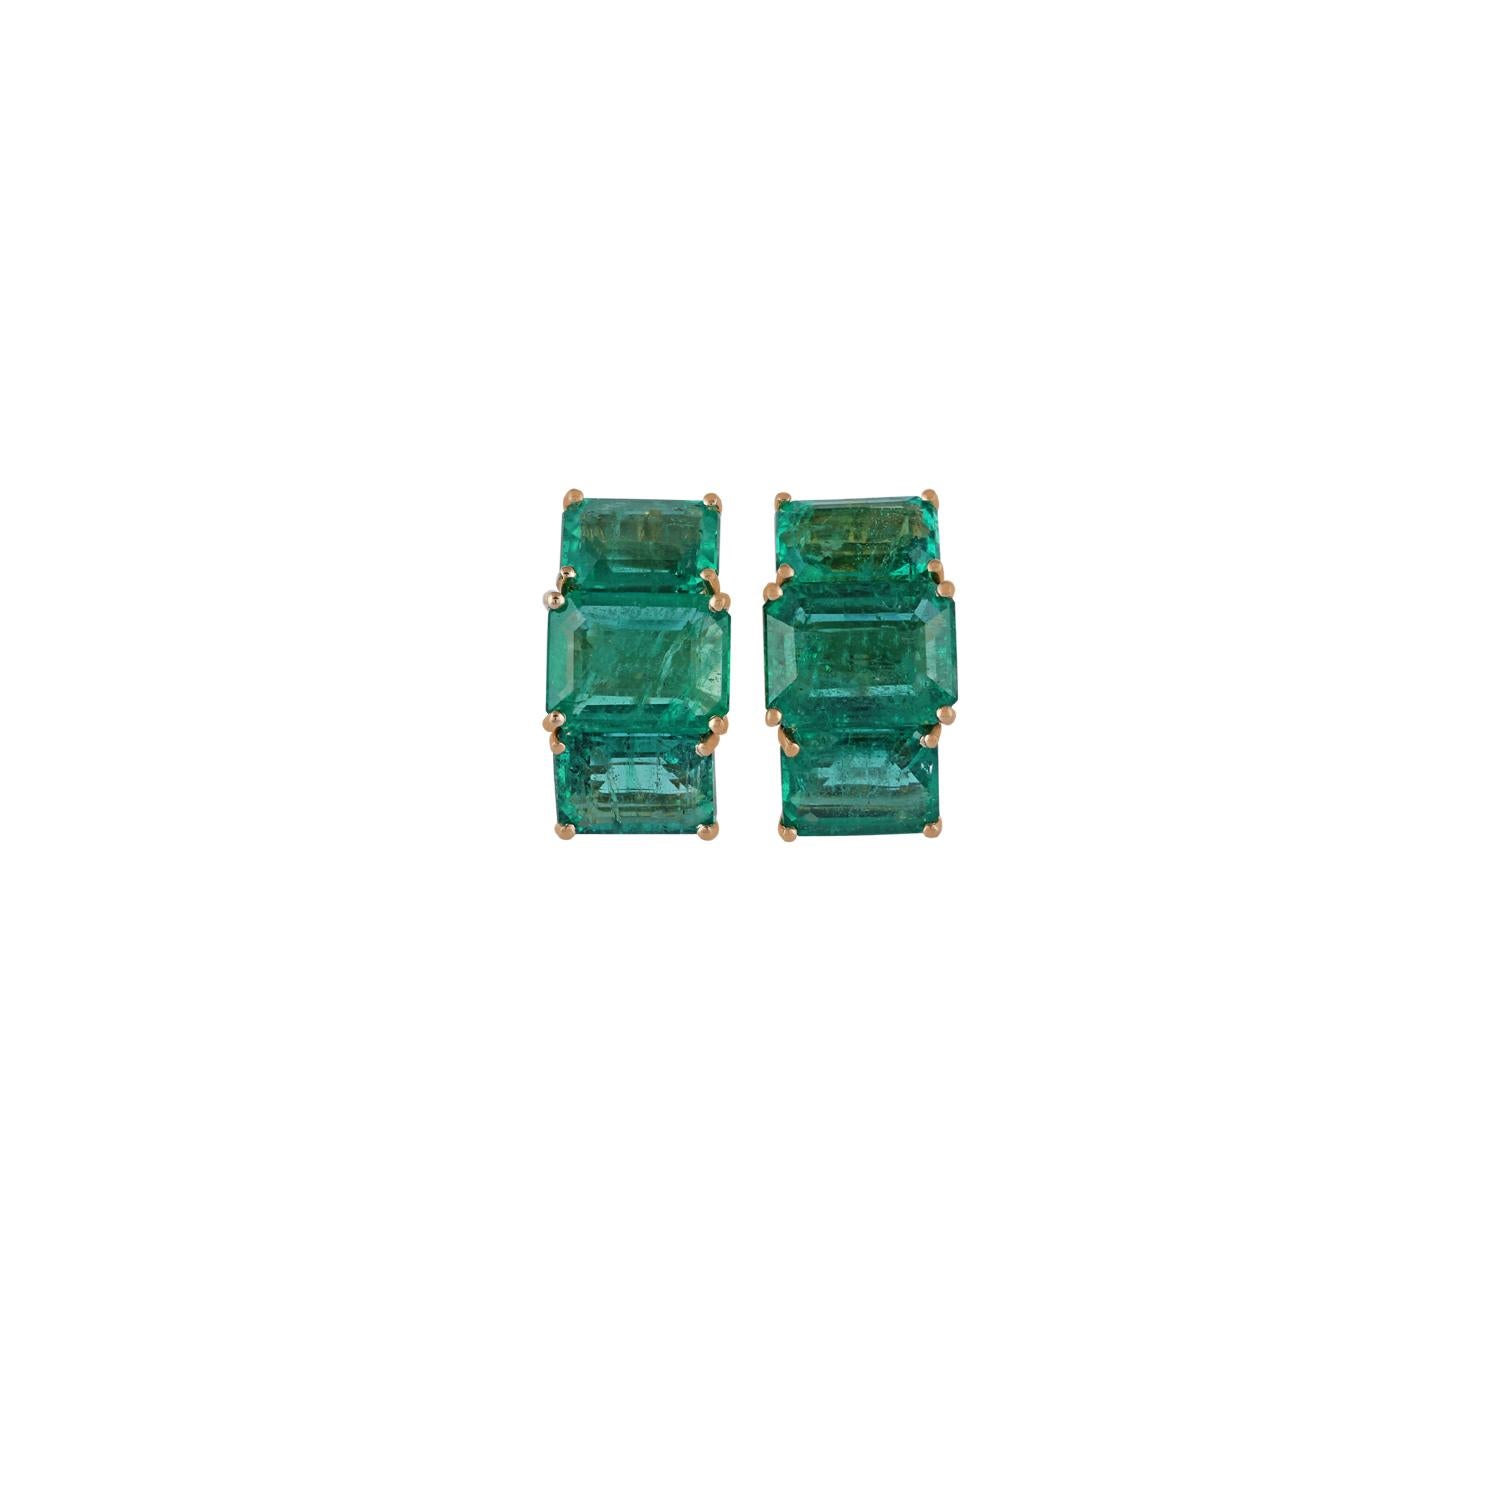 These are an elegant & classic style of earrings studded in 18k yellow gold with 6 pieces of octagonal shaped  emeralds weight 11.20 carats, these entire earrings are studded in 18k yellow gold weight 4.14 grams, these earrings have a simple pull &